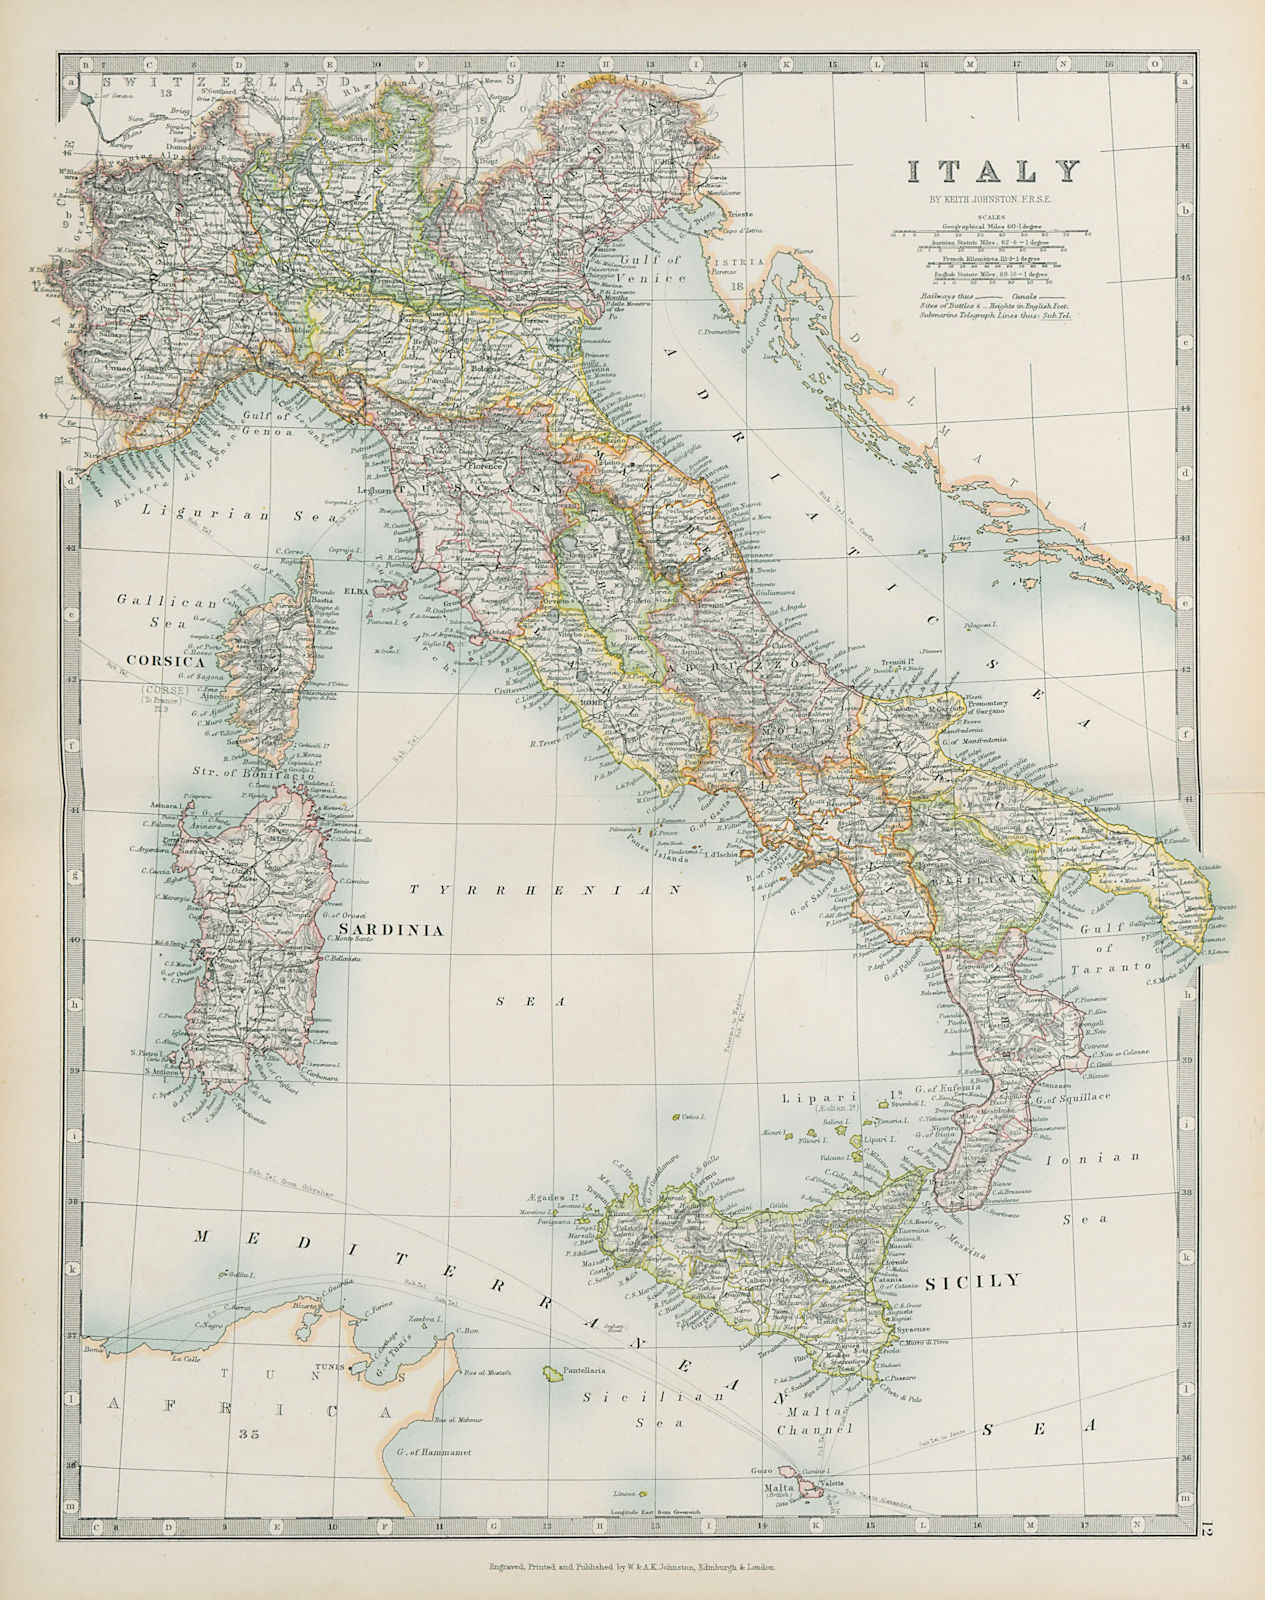 Associate Product ITALY Showing regions railways canals Telegraph cables JOHNSTON 1901 old map